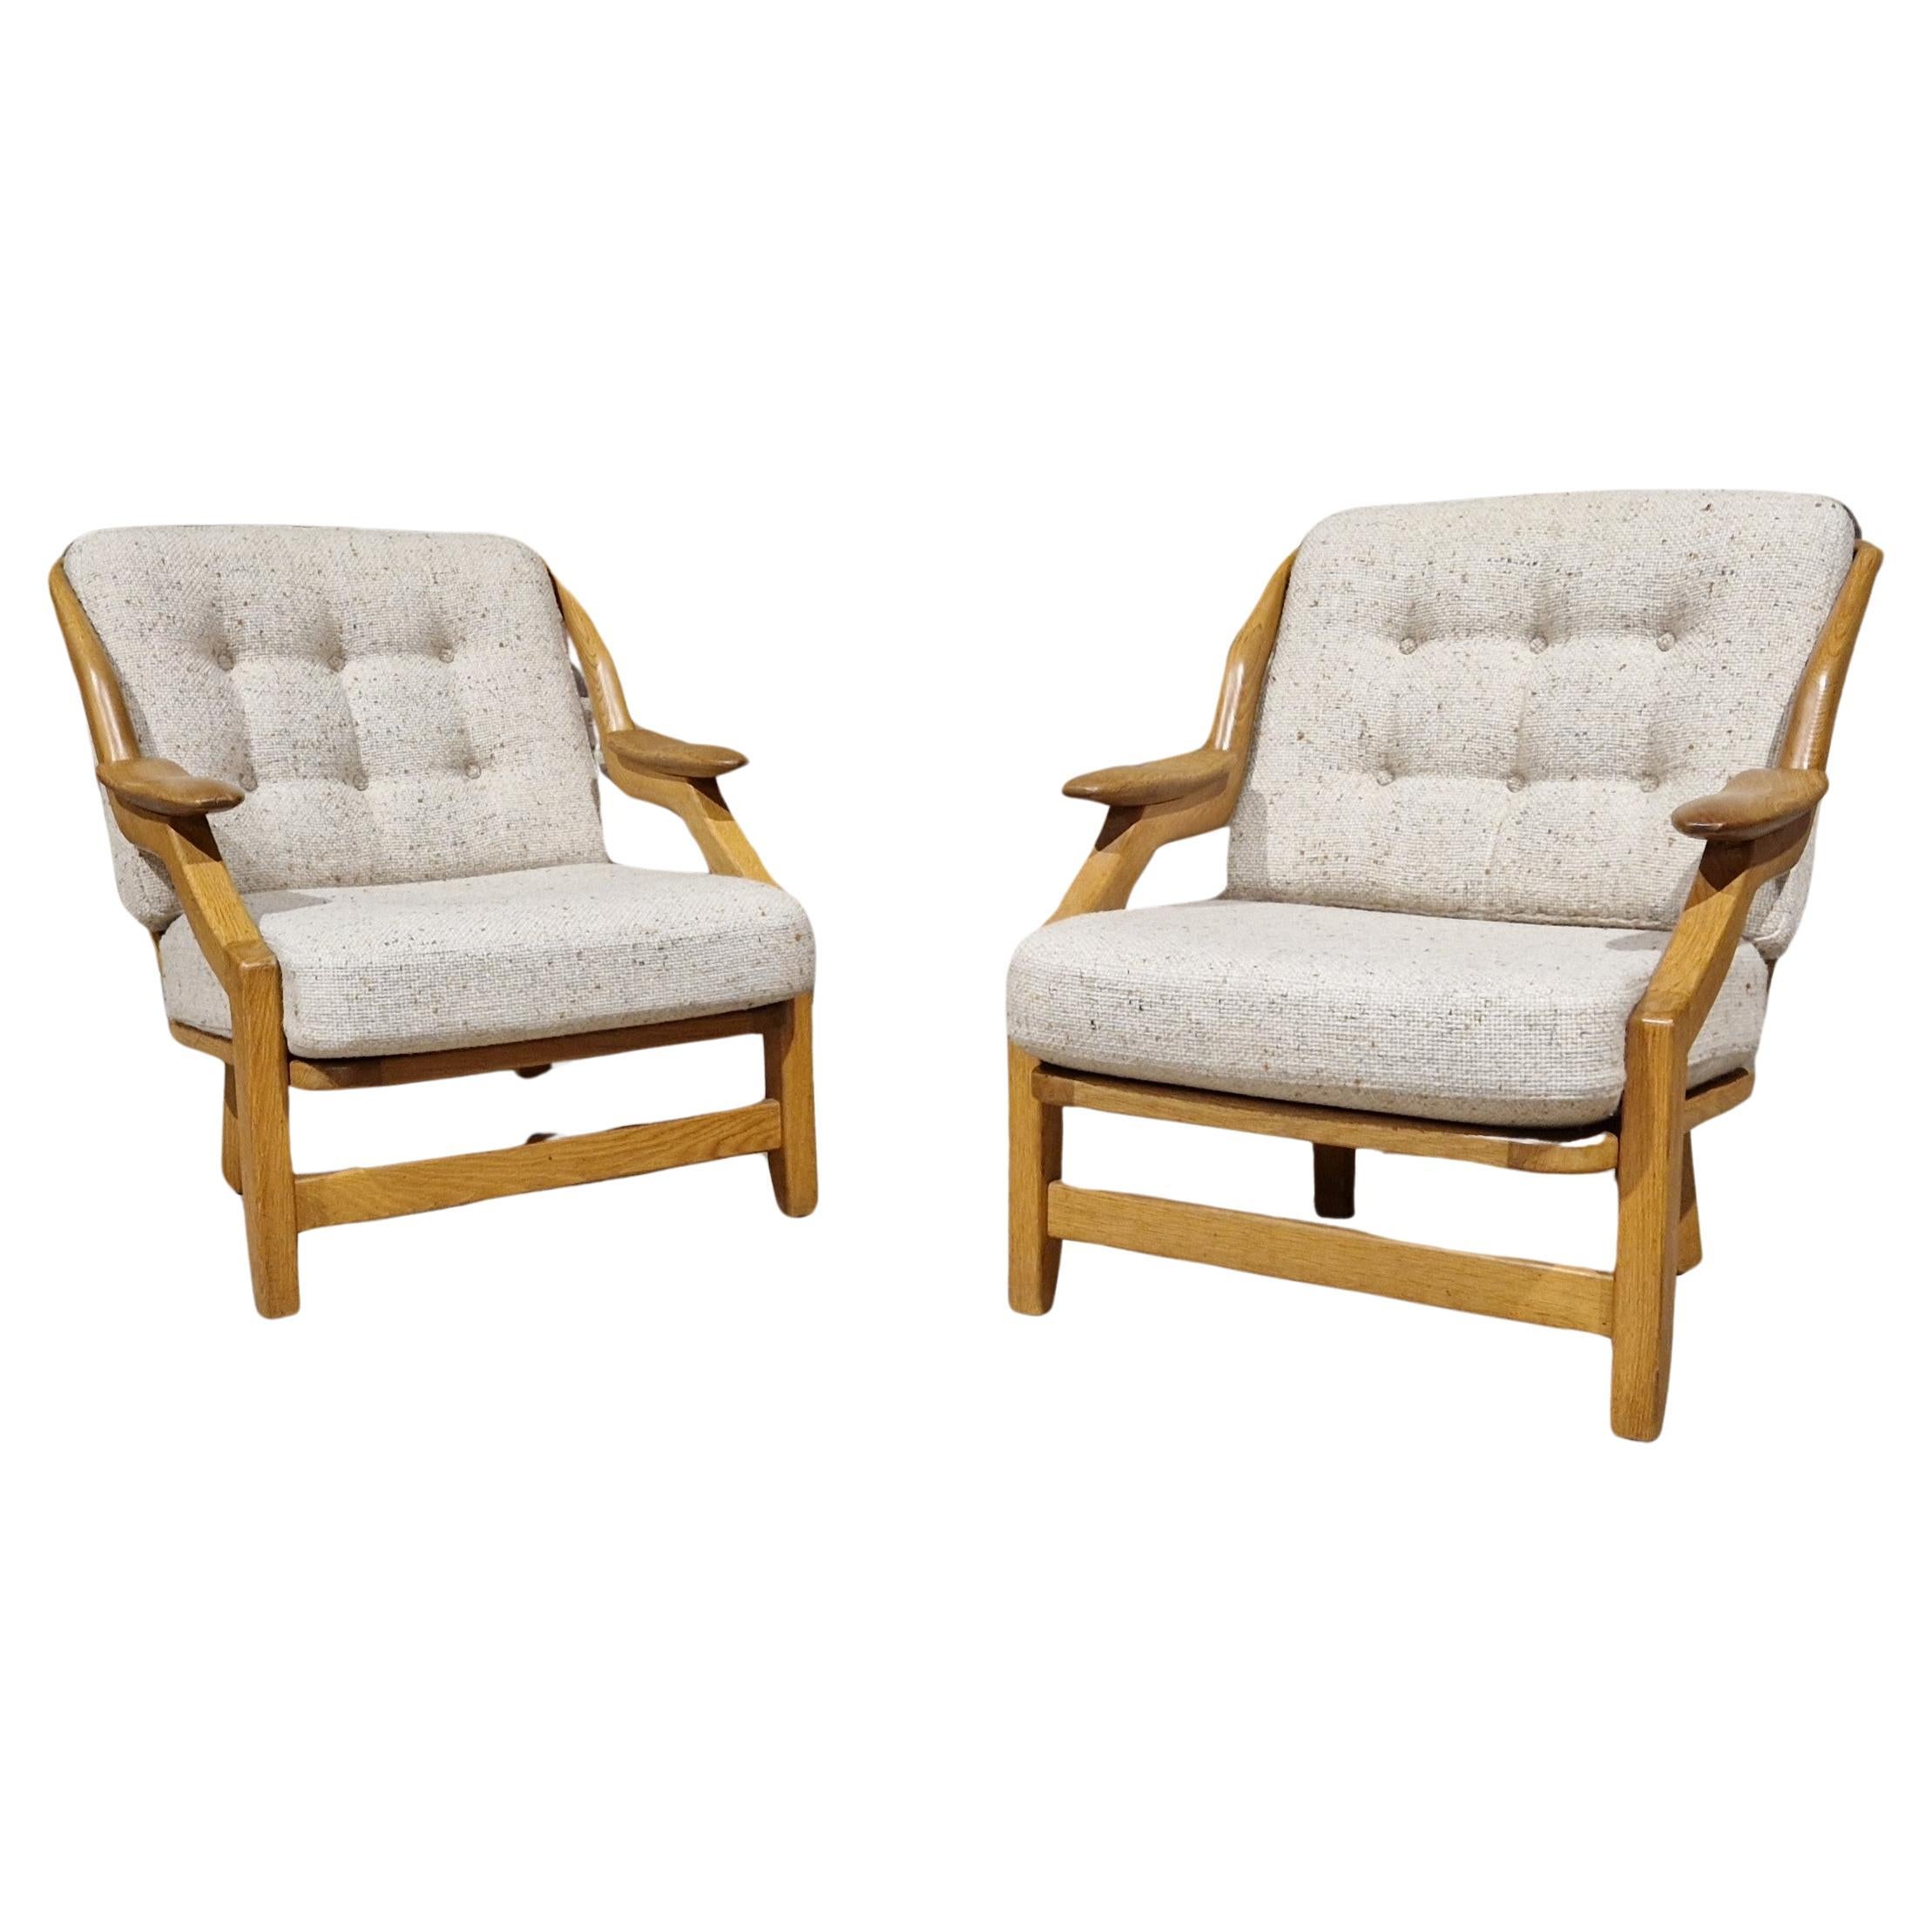 Pair of armchairs by Guillerme et Chambron